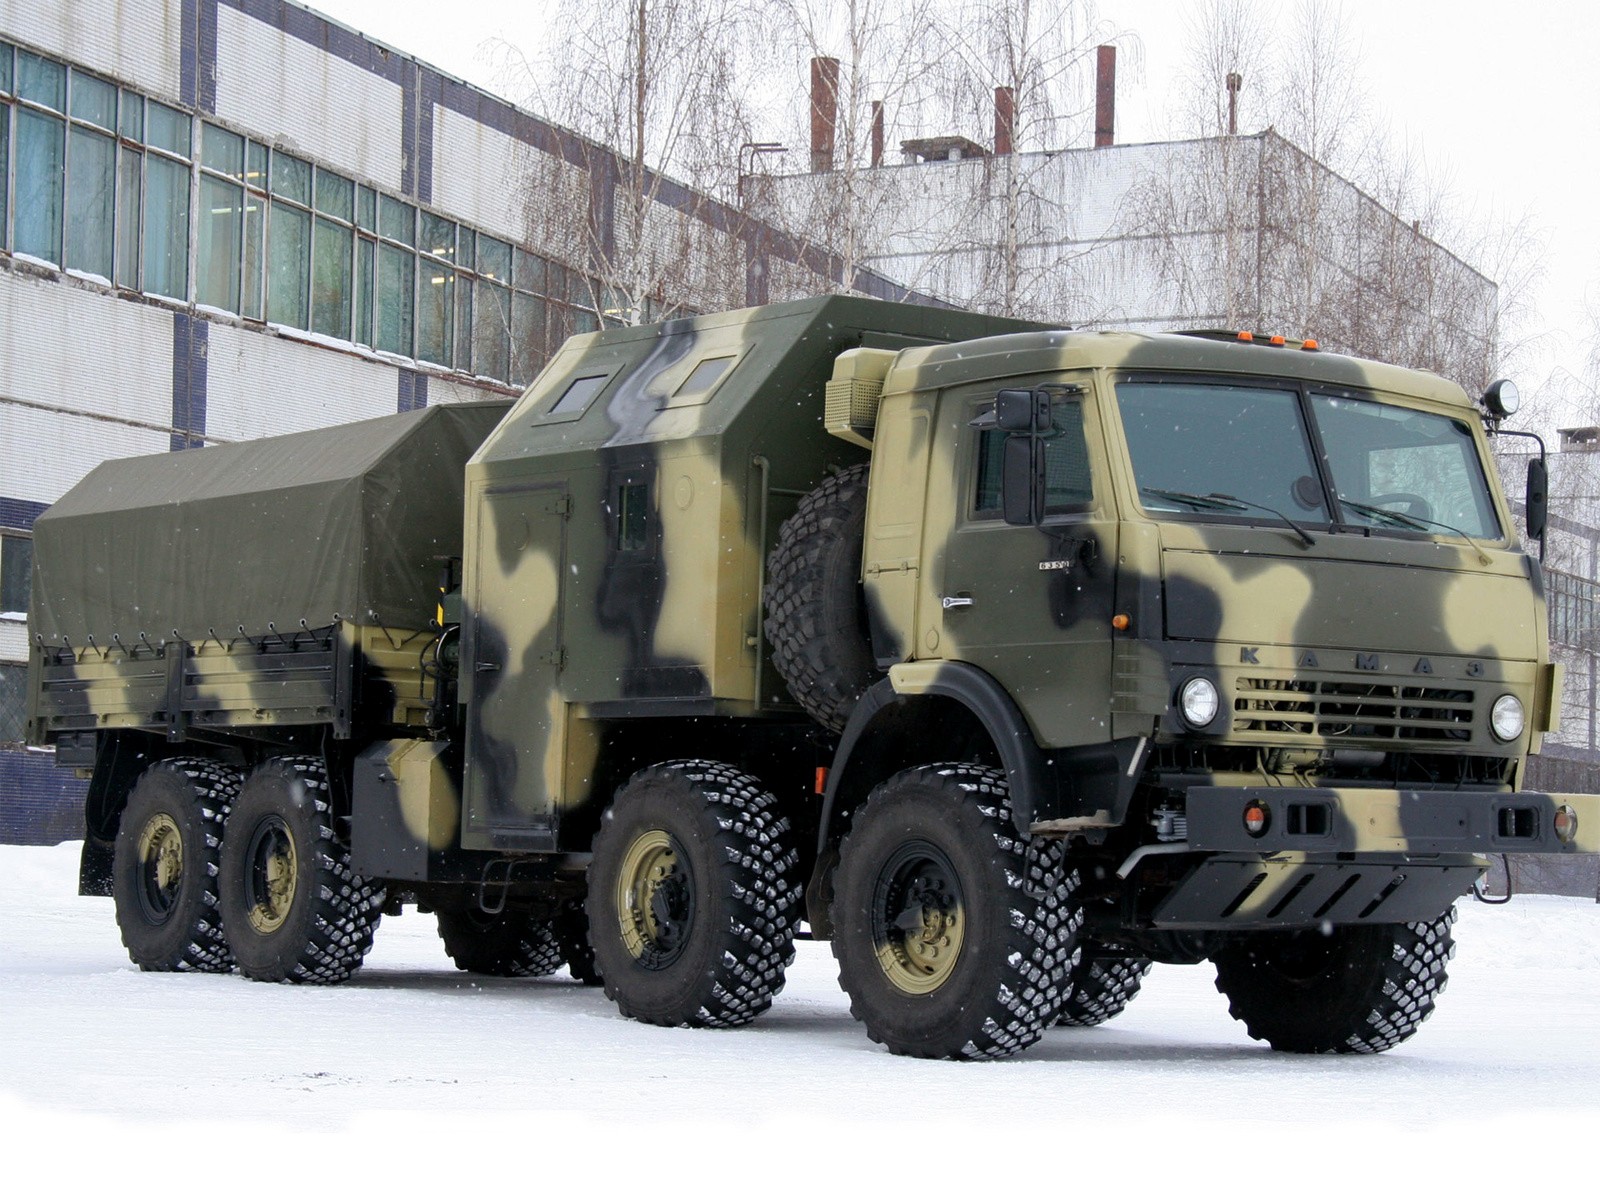 Wallpaper, Truck, Kamaz, land vehicle, commercial vehicle, self propelled artillery, armored car, military vehicle, light commercial vehicle 1600x1200